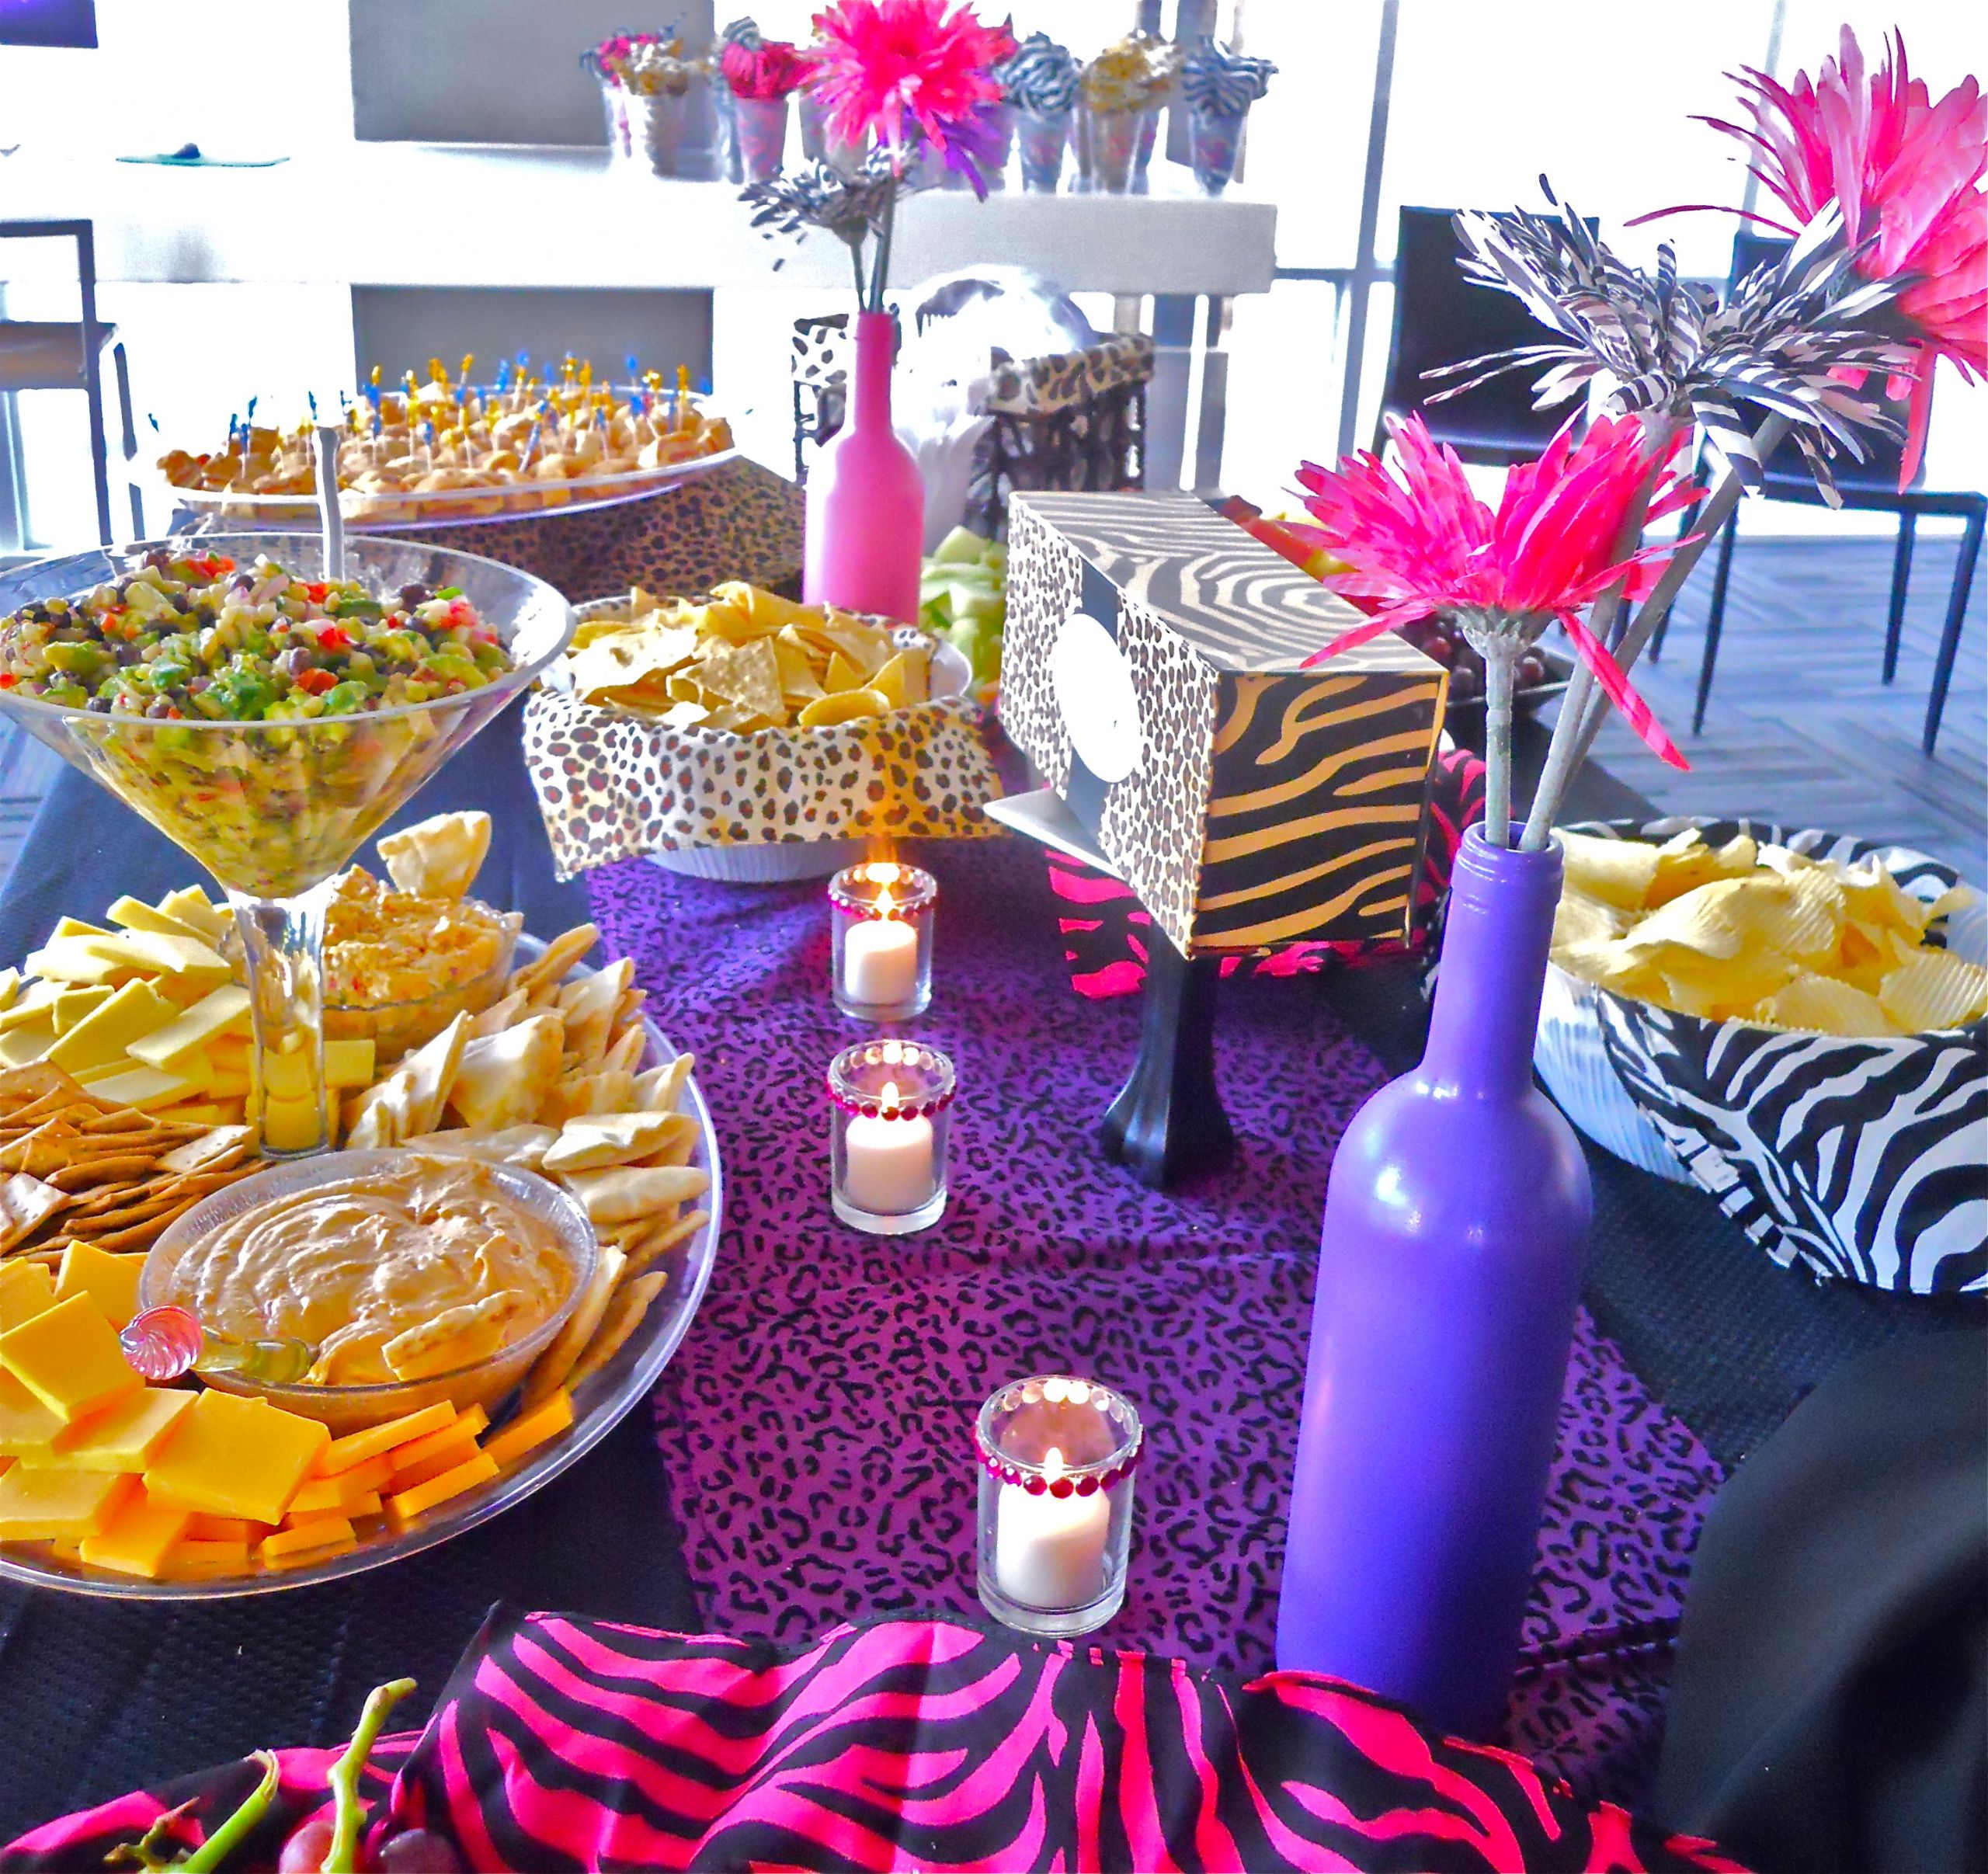 Food Ideas For Bachelorette Party
 Real Housewives of Denver Bachelorette Party Ideas Part 2